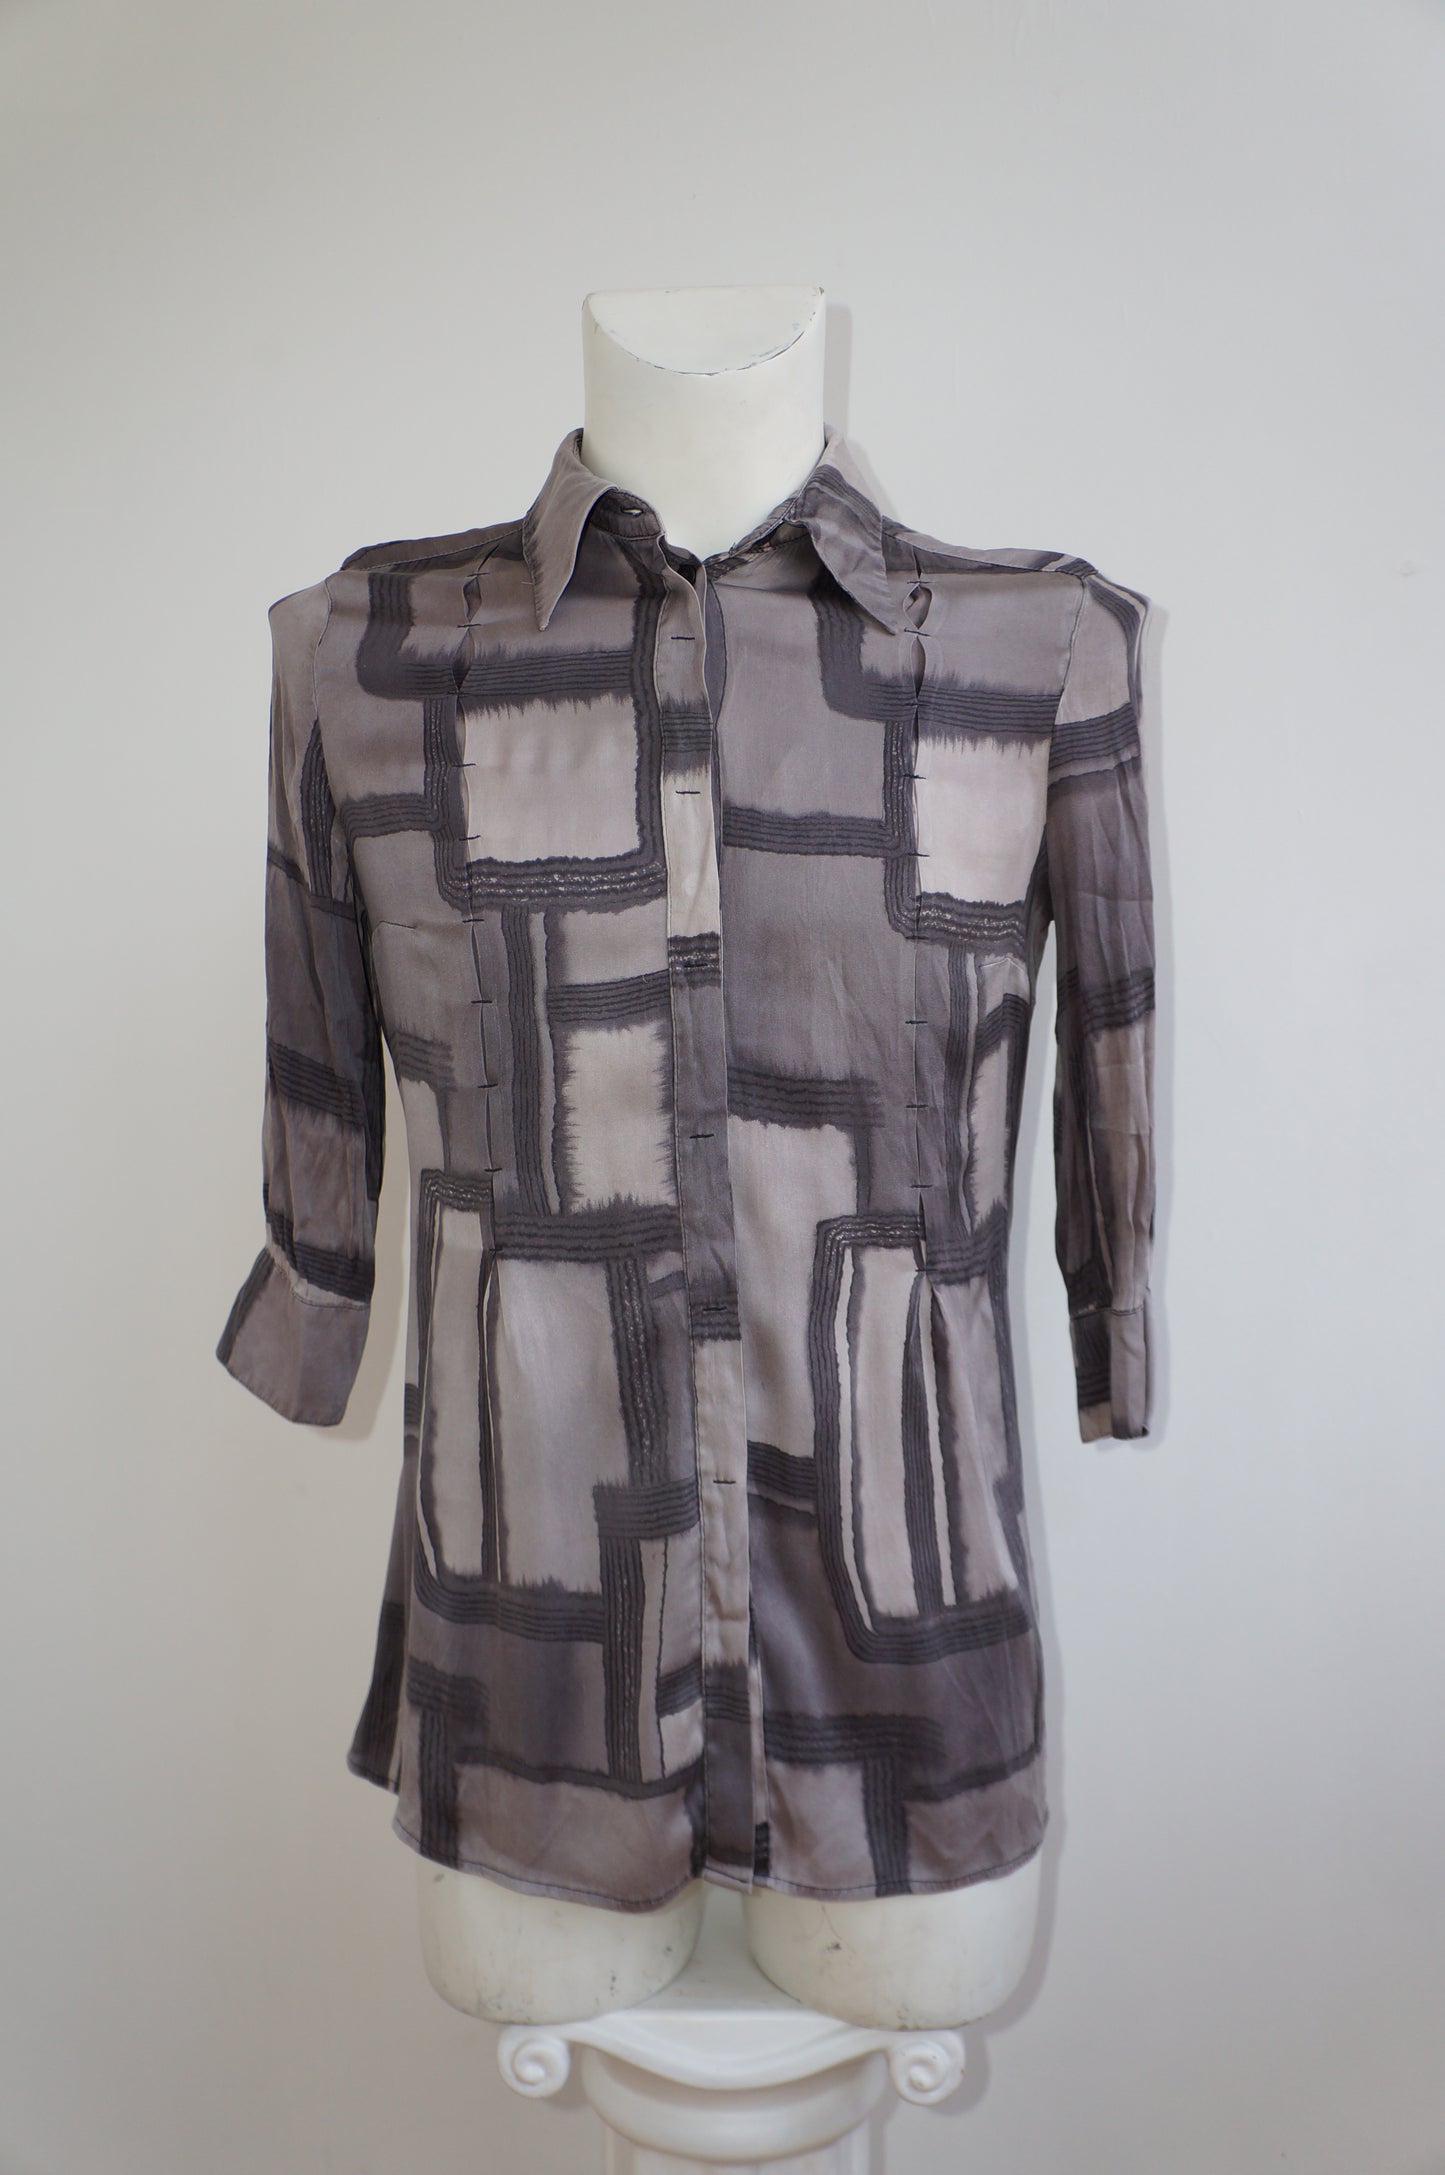 Luisa knotted shirt